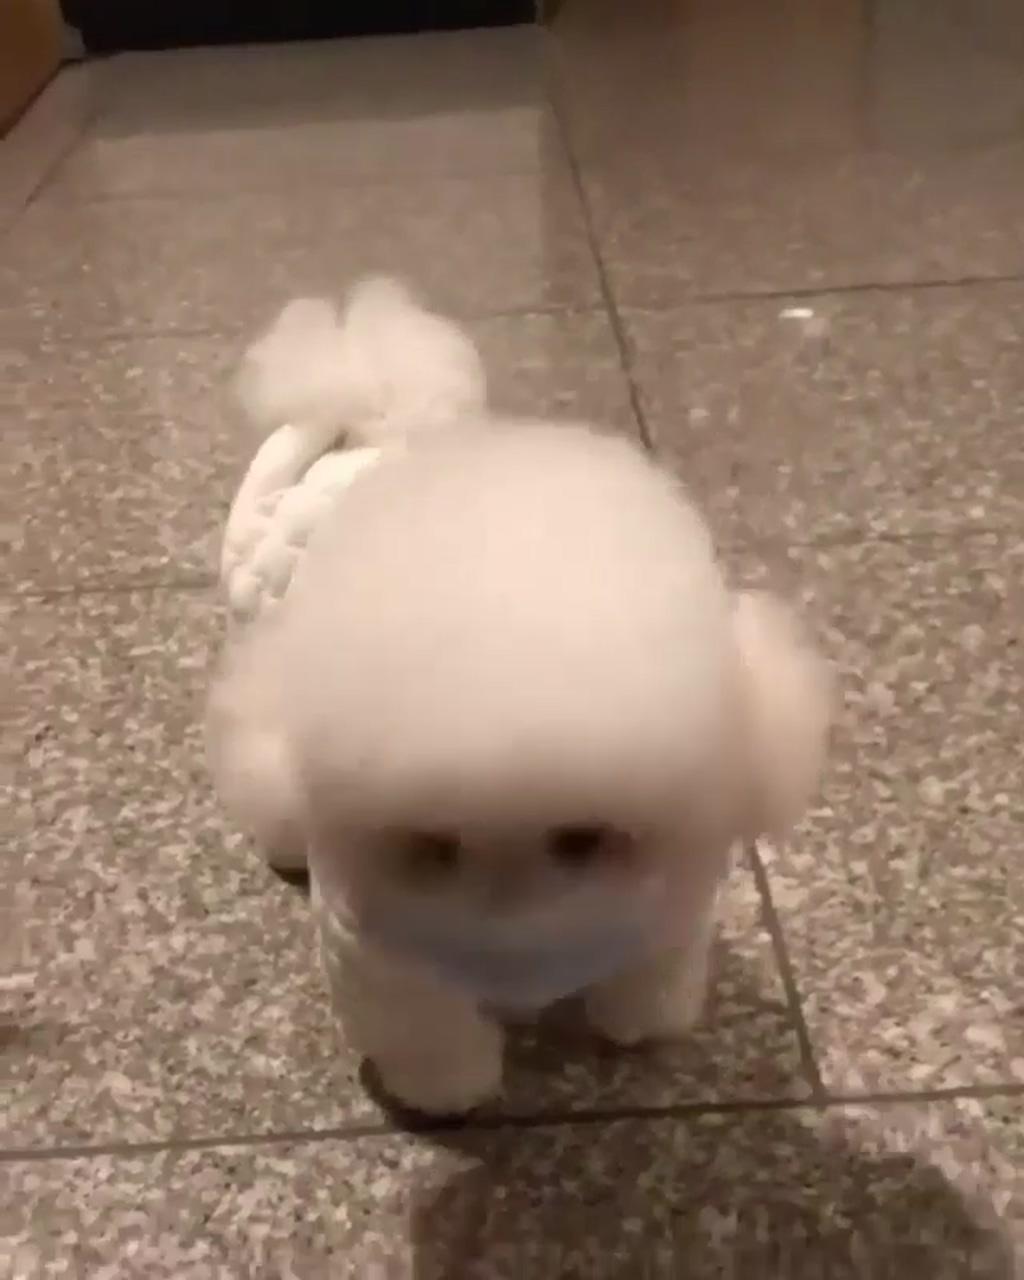 Dog giving social message to wear mask and stay protected | so adorable maltese puppy